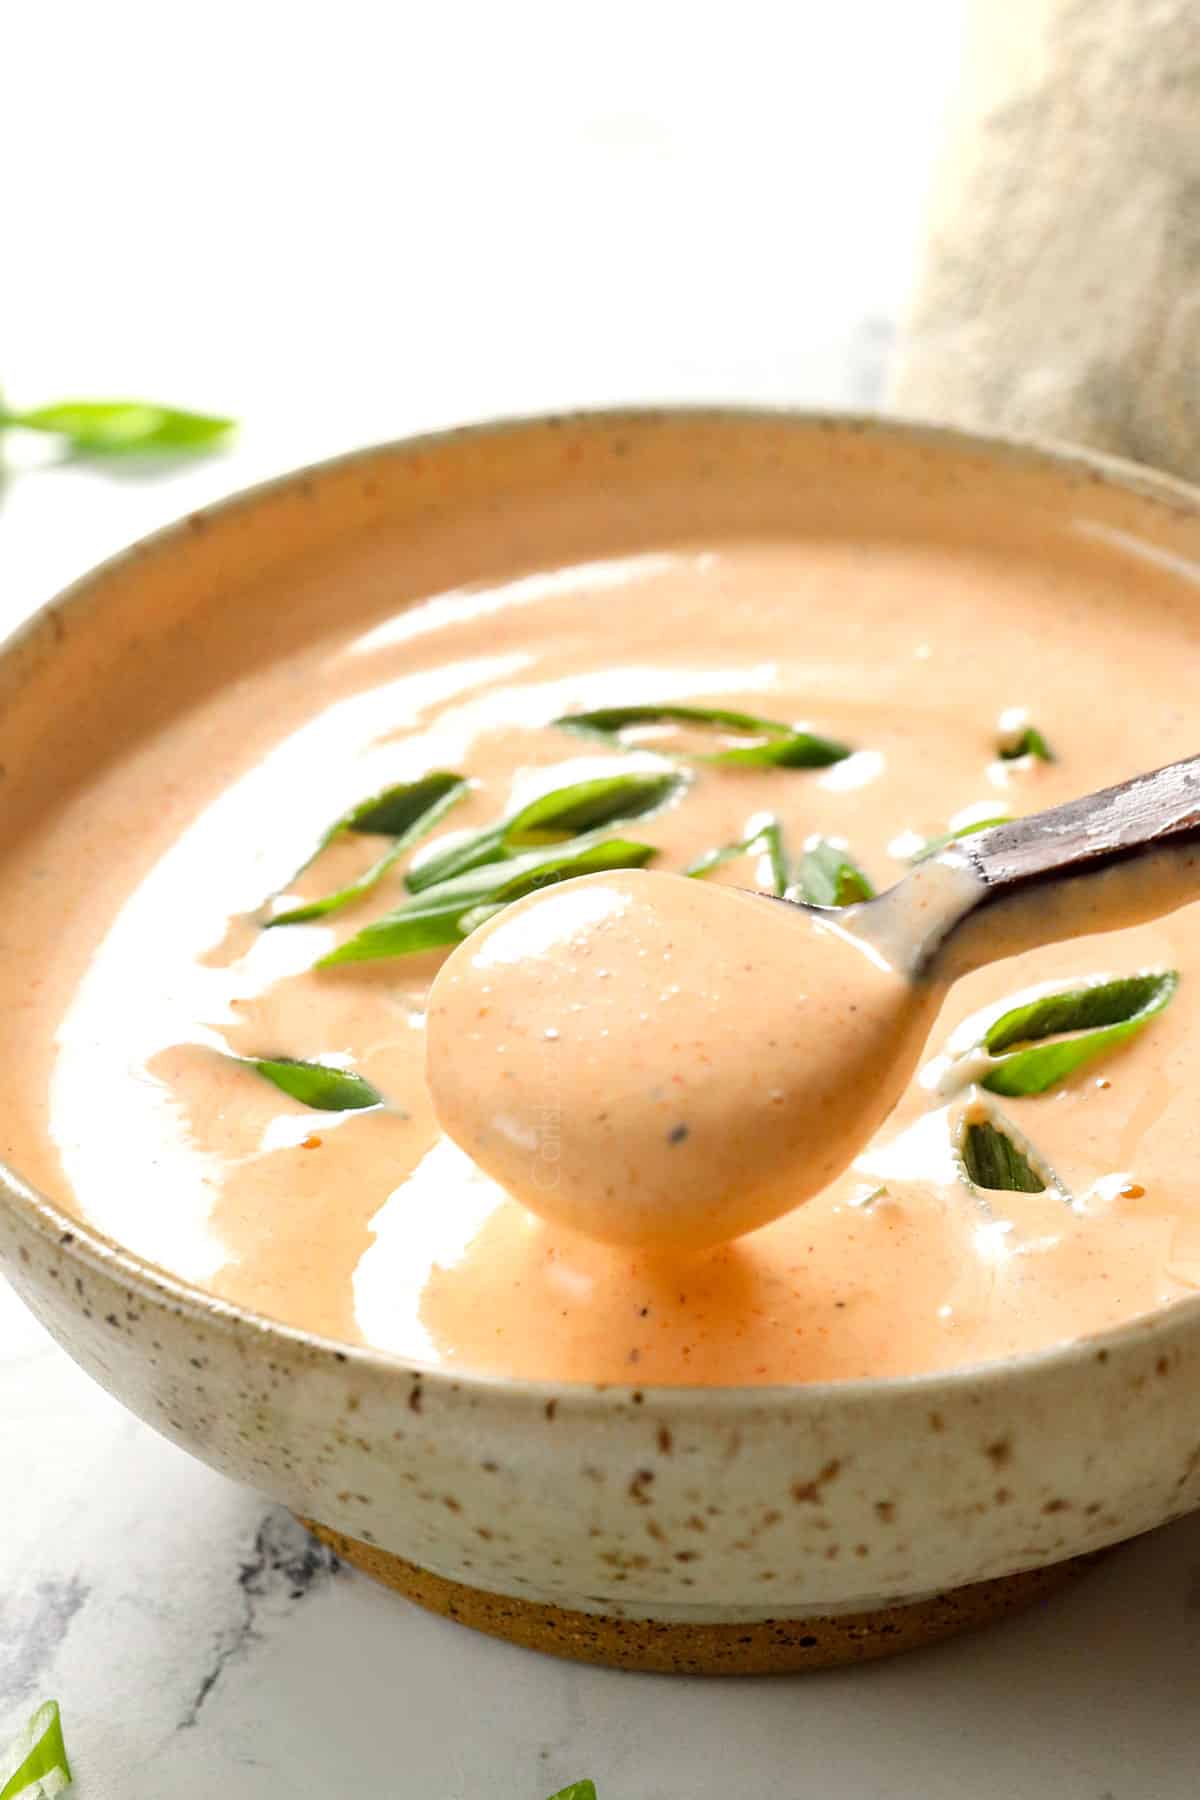 scooping up yum yum sauce recipe with a spoon showing how thick and creamy it is